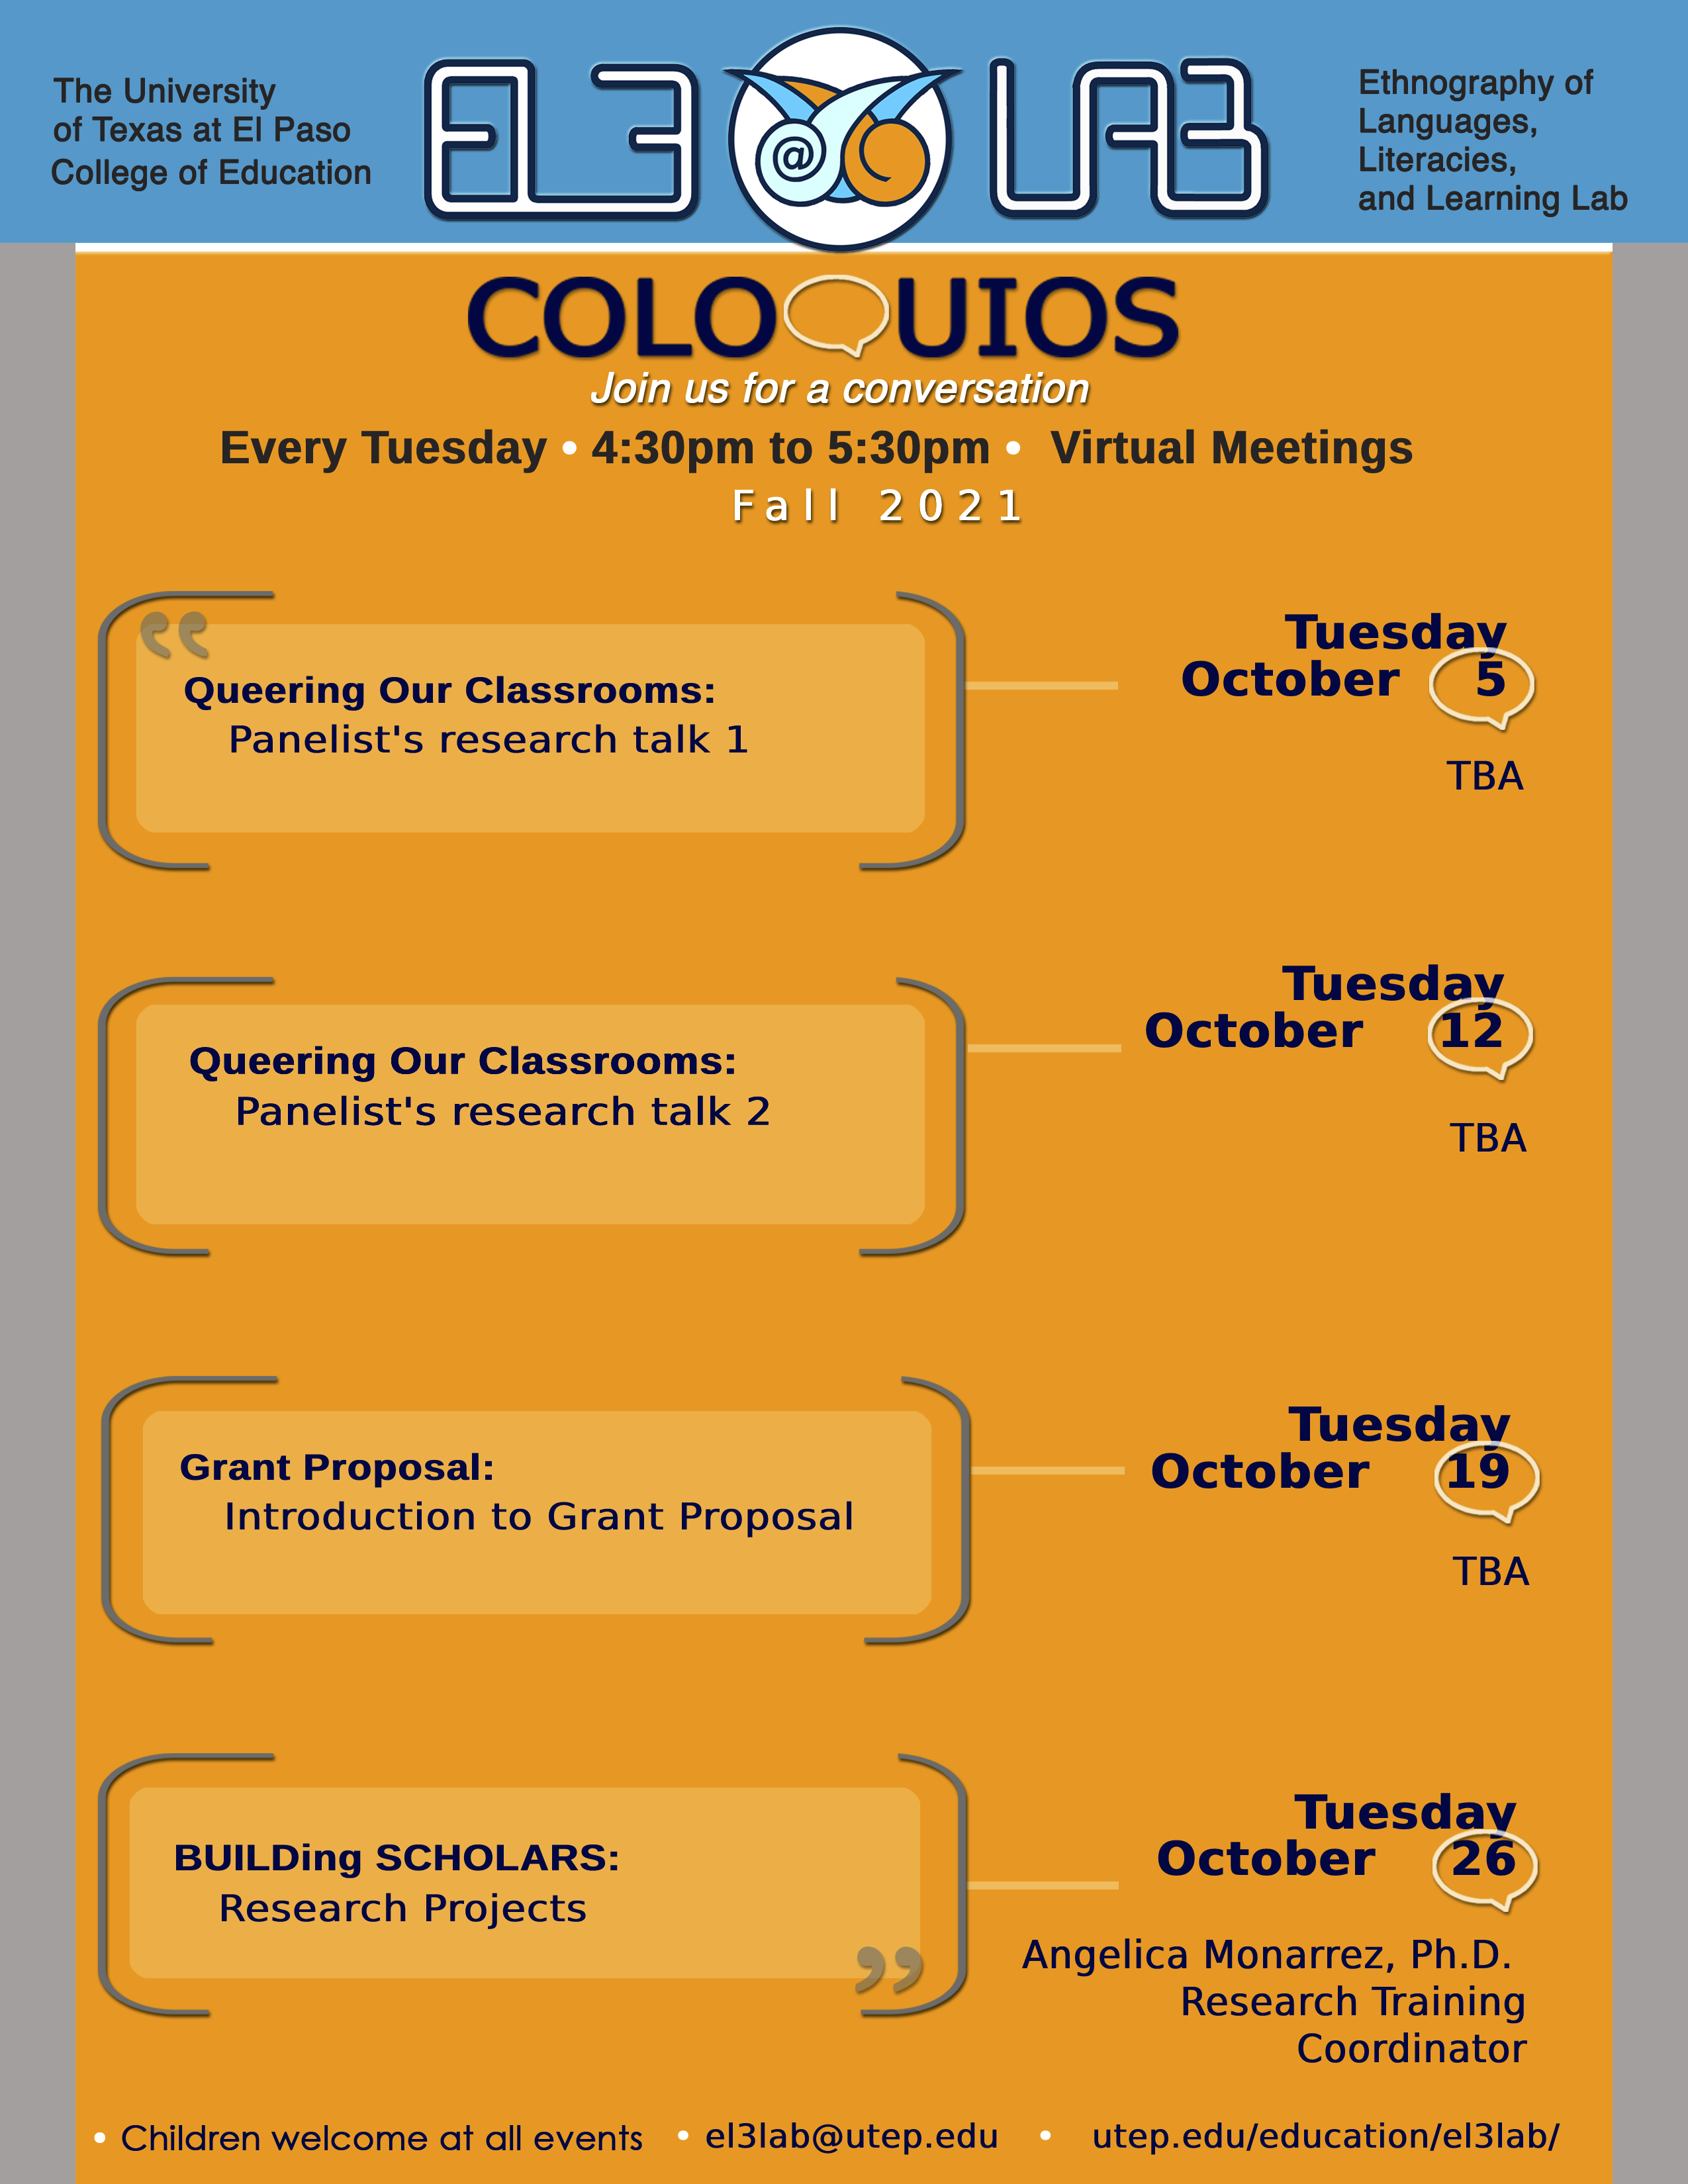 Coloquio-Flyer-Fall-2021-2.png